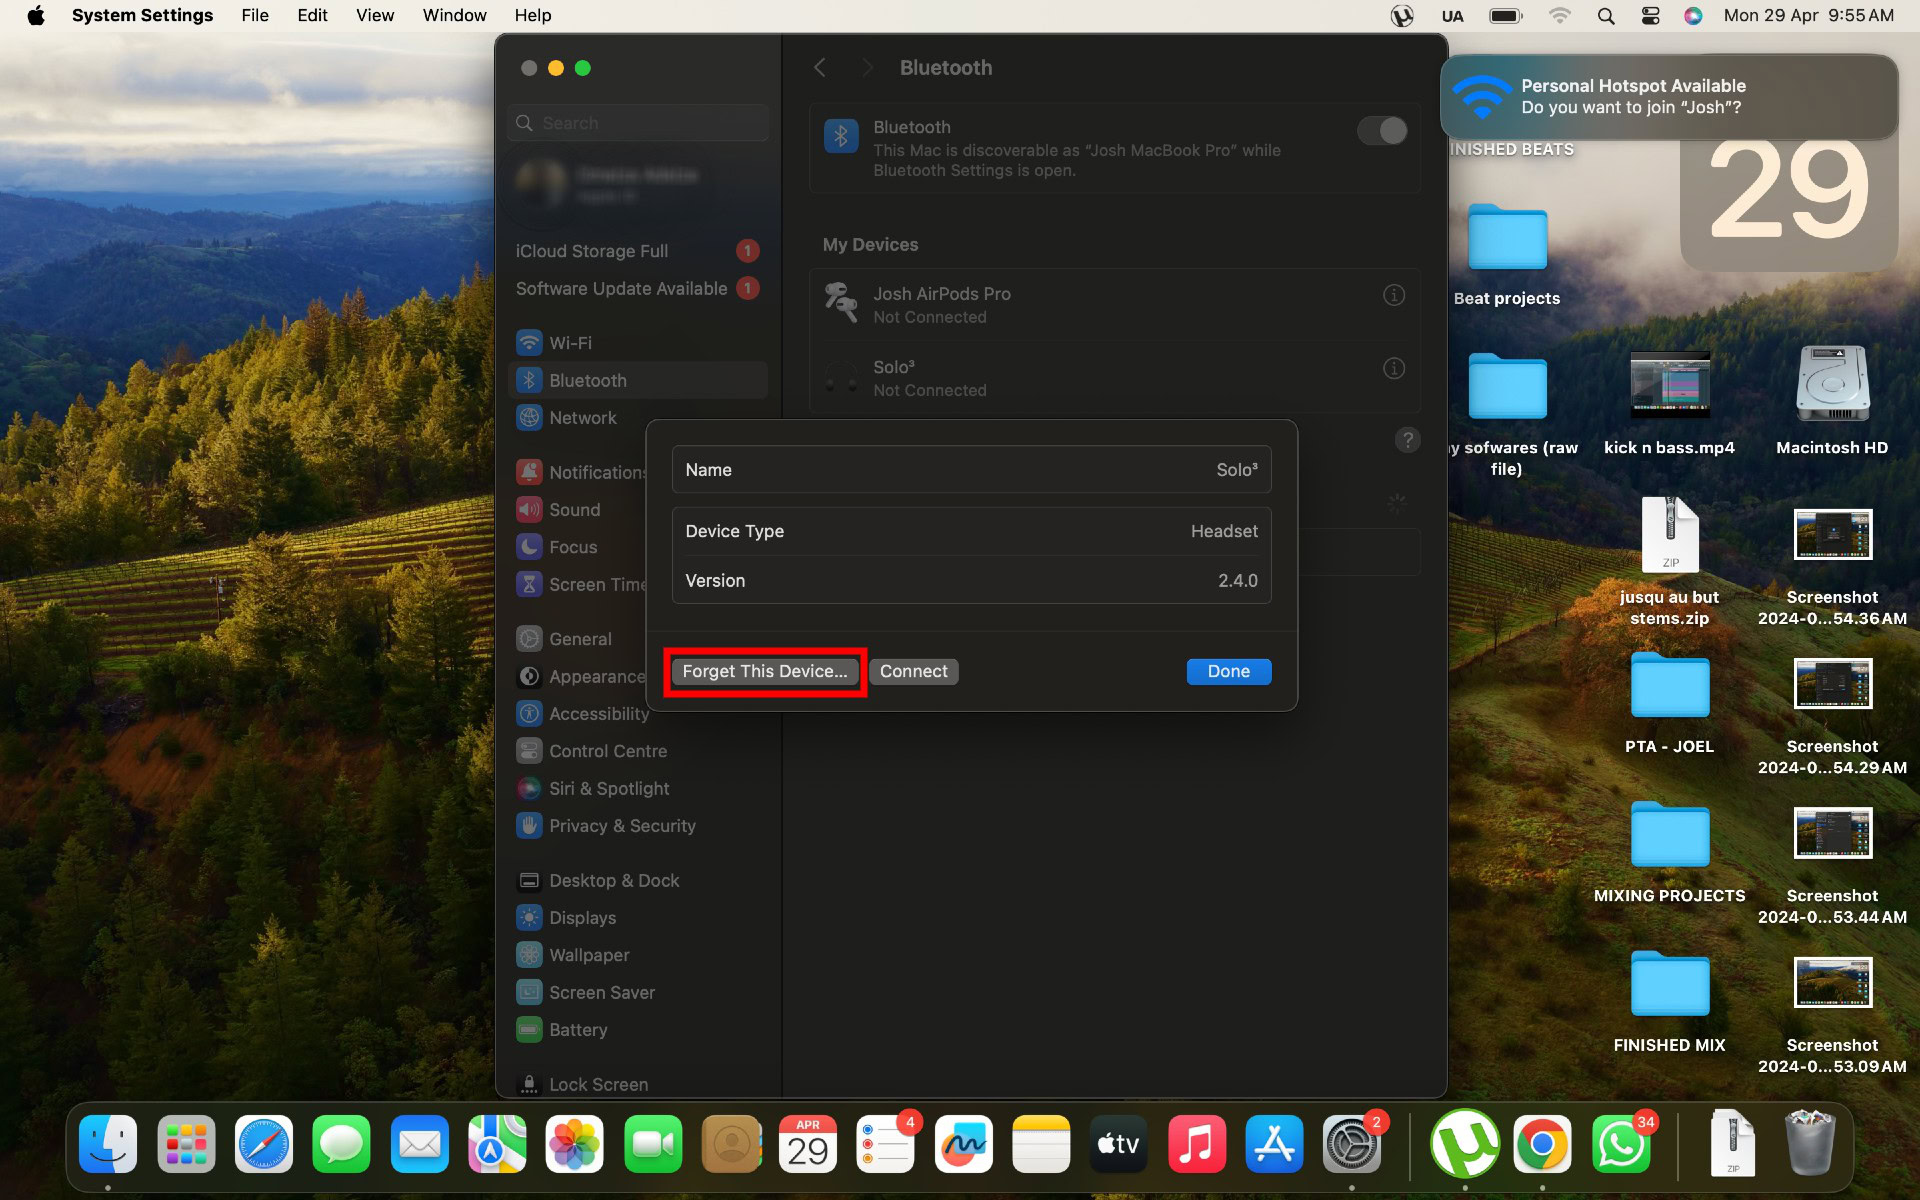 Forgetting a Bluetooth device on MacOS